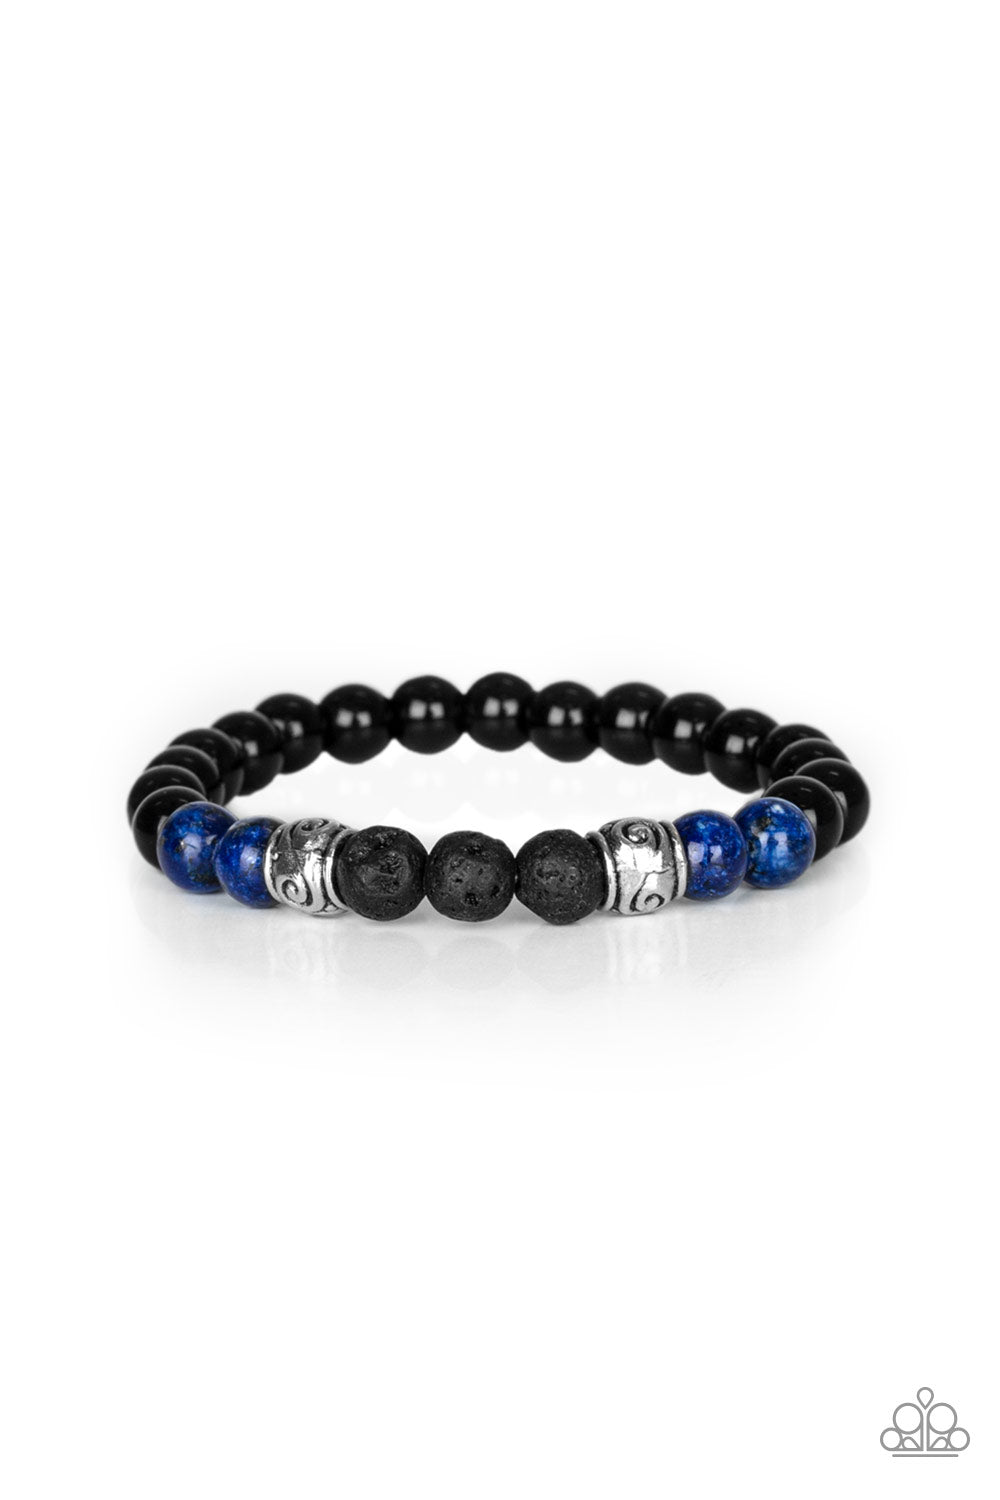 Paparazzi Proverb - Blue Bracelet - A Finishing Touch Jewelry